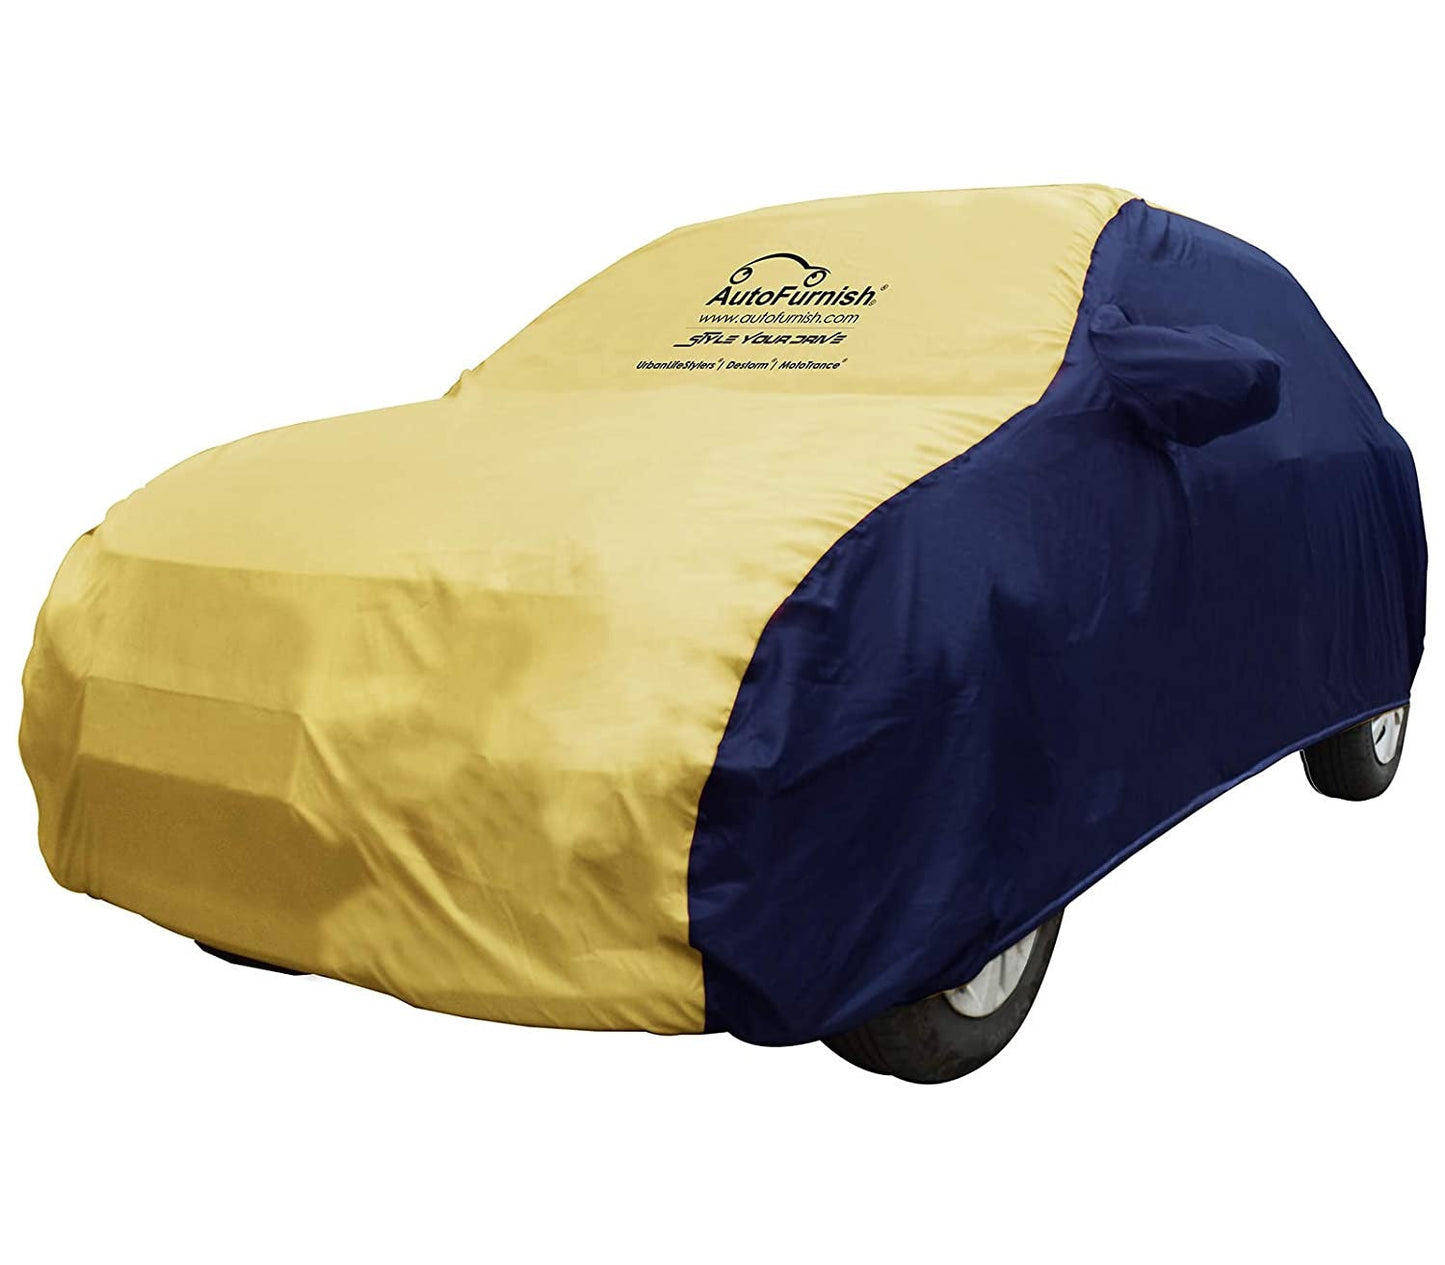 Hyundai Aura (2020) Car Body Cover, Triple Stitched, Heat & Water Resistant with Side Mirror Pockets (SPORTY Series)